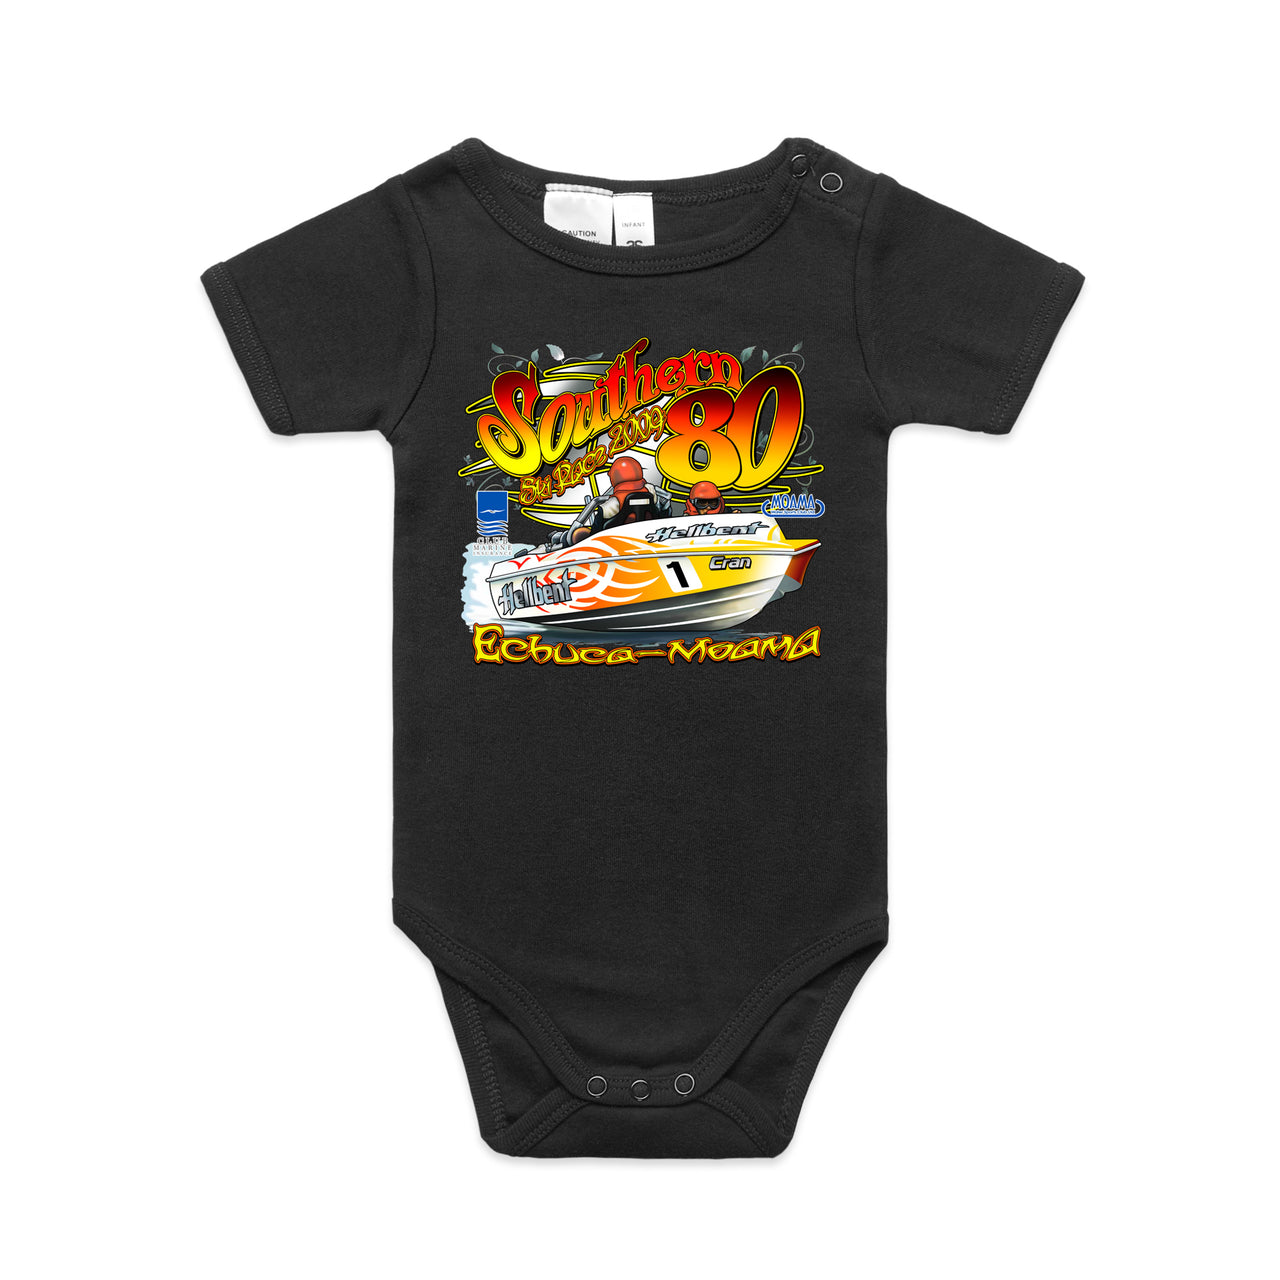 S80 2009 Hellbent Infant One-Piece